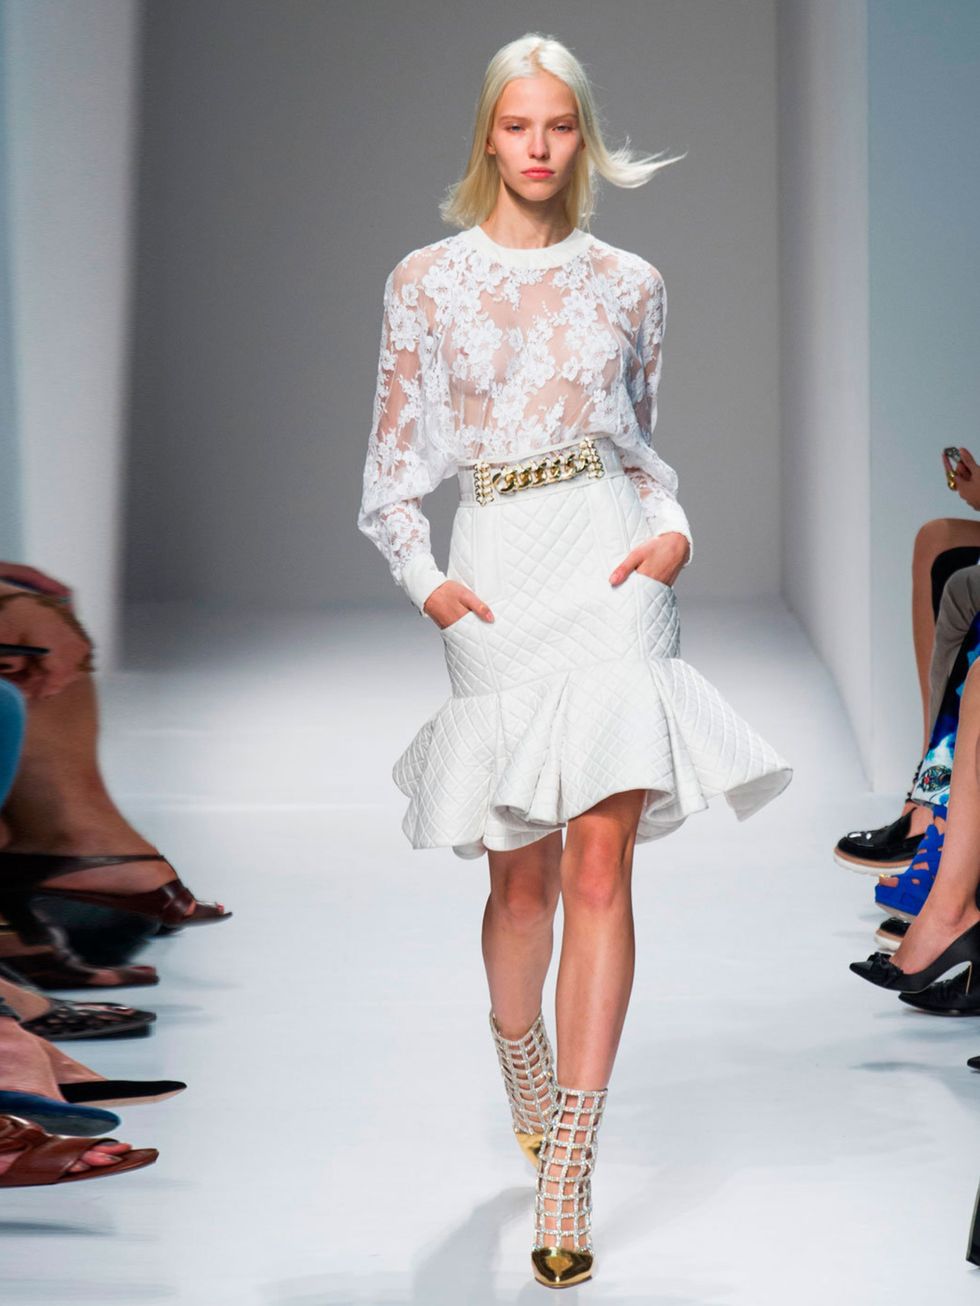 <p><strong>Sasha Luss</strong> at <a href="http://www.elleuk.com/catwalk/designer-a-z/balmain/">Balmain</a>.</p><p>'For me, the face of SS14. The newly super-blonde Russian beauty walked every show that mattered. And whatta walk she has!' </p>